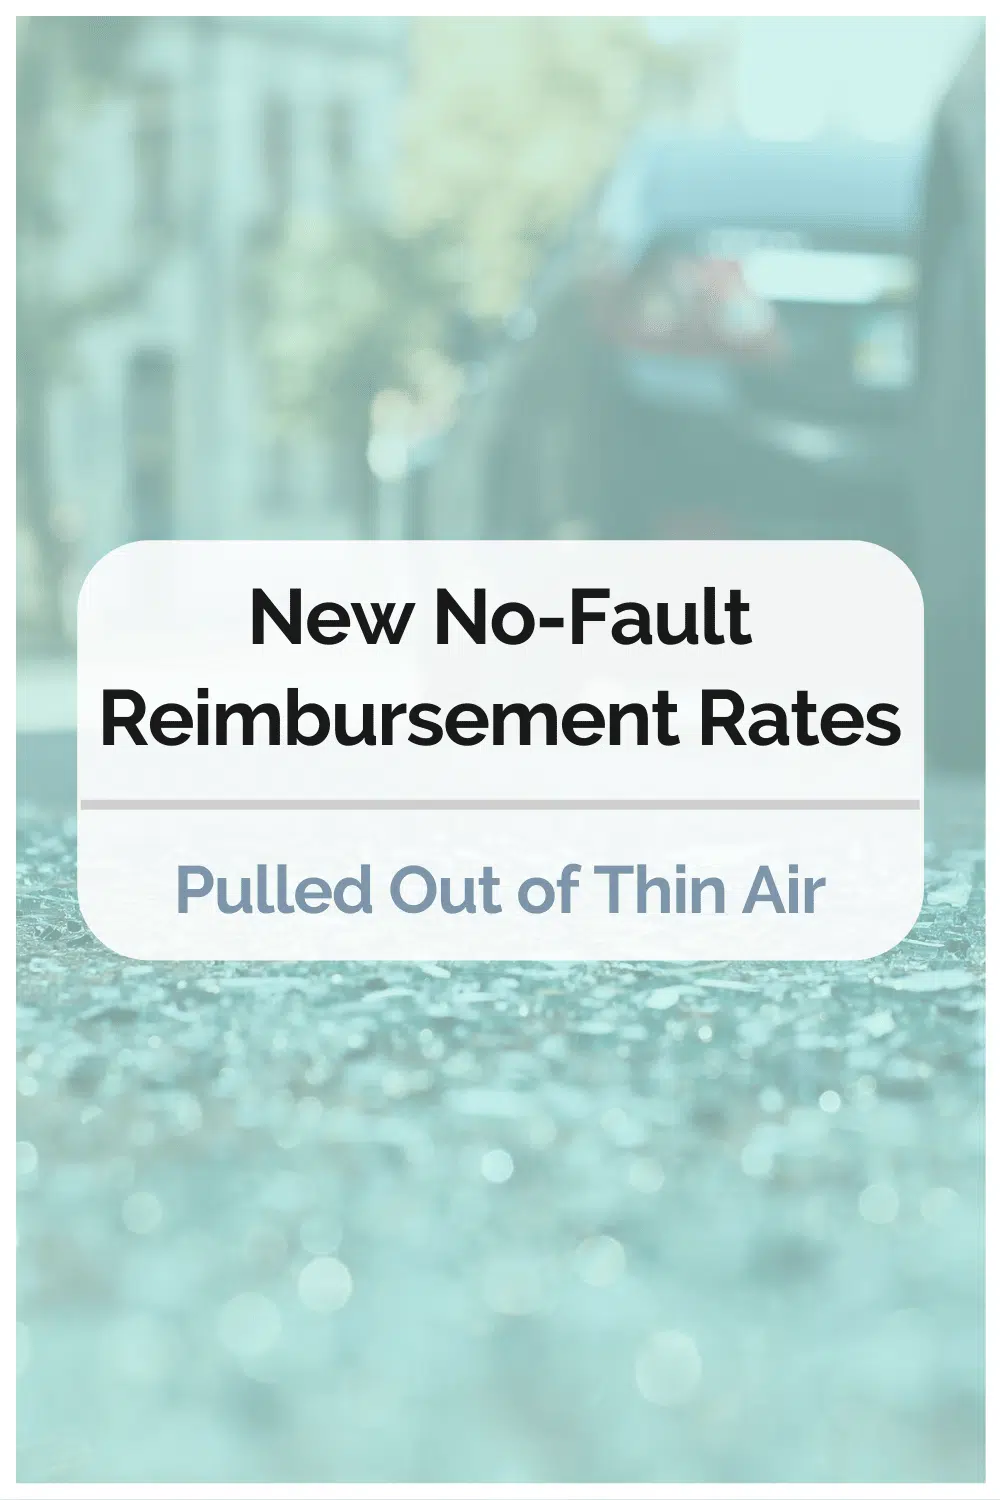 New No-Fault Reimbursement Rates Pulled Out of Thin Air